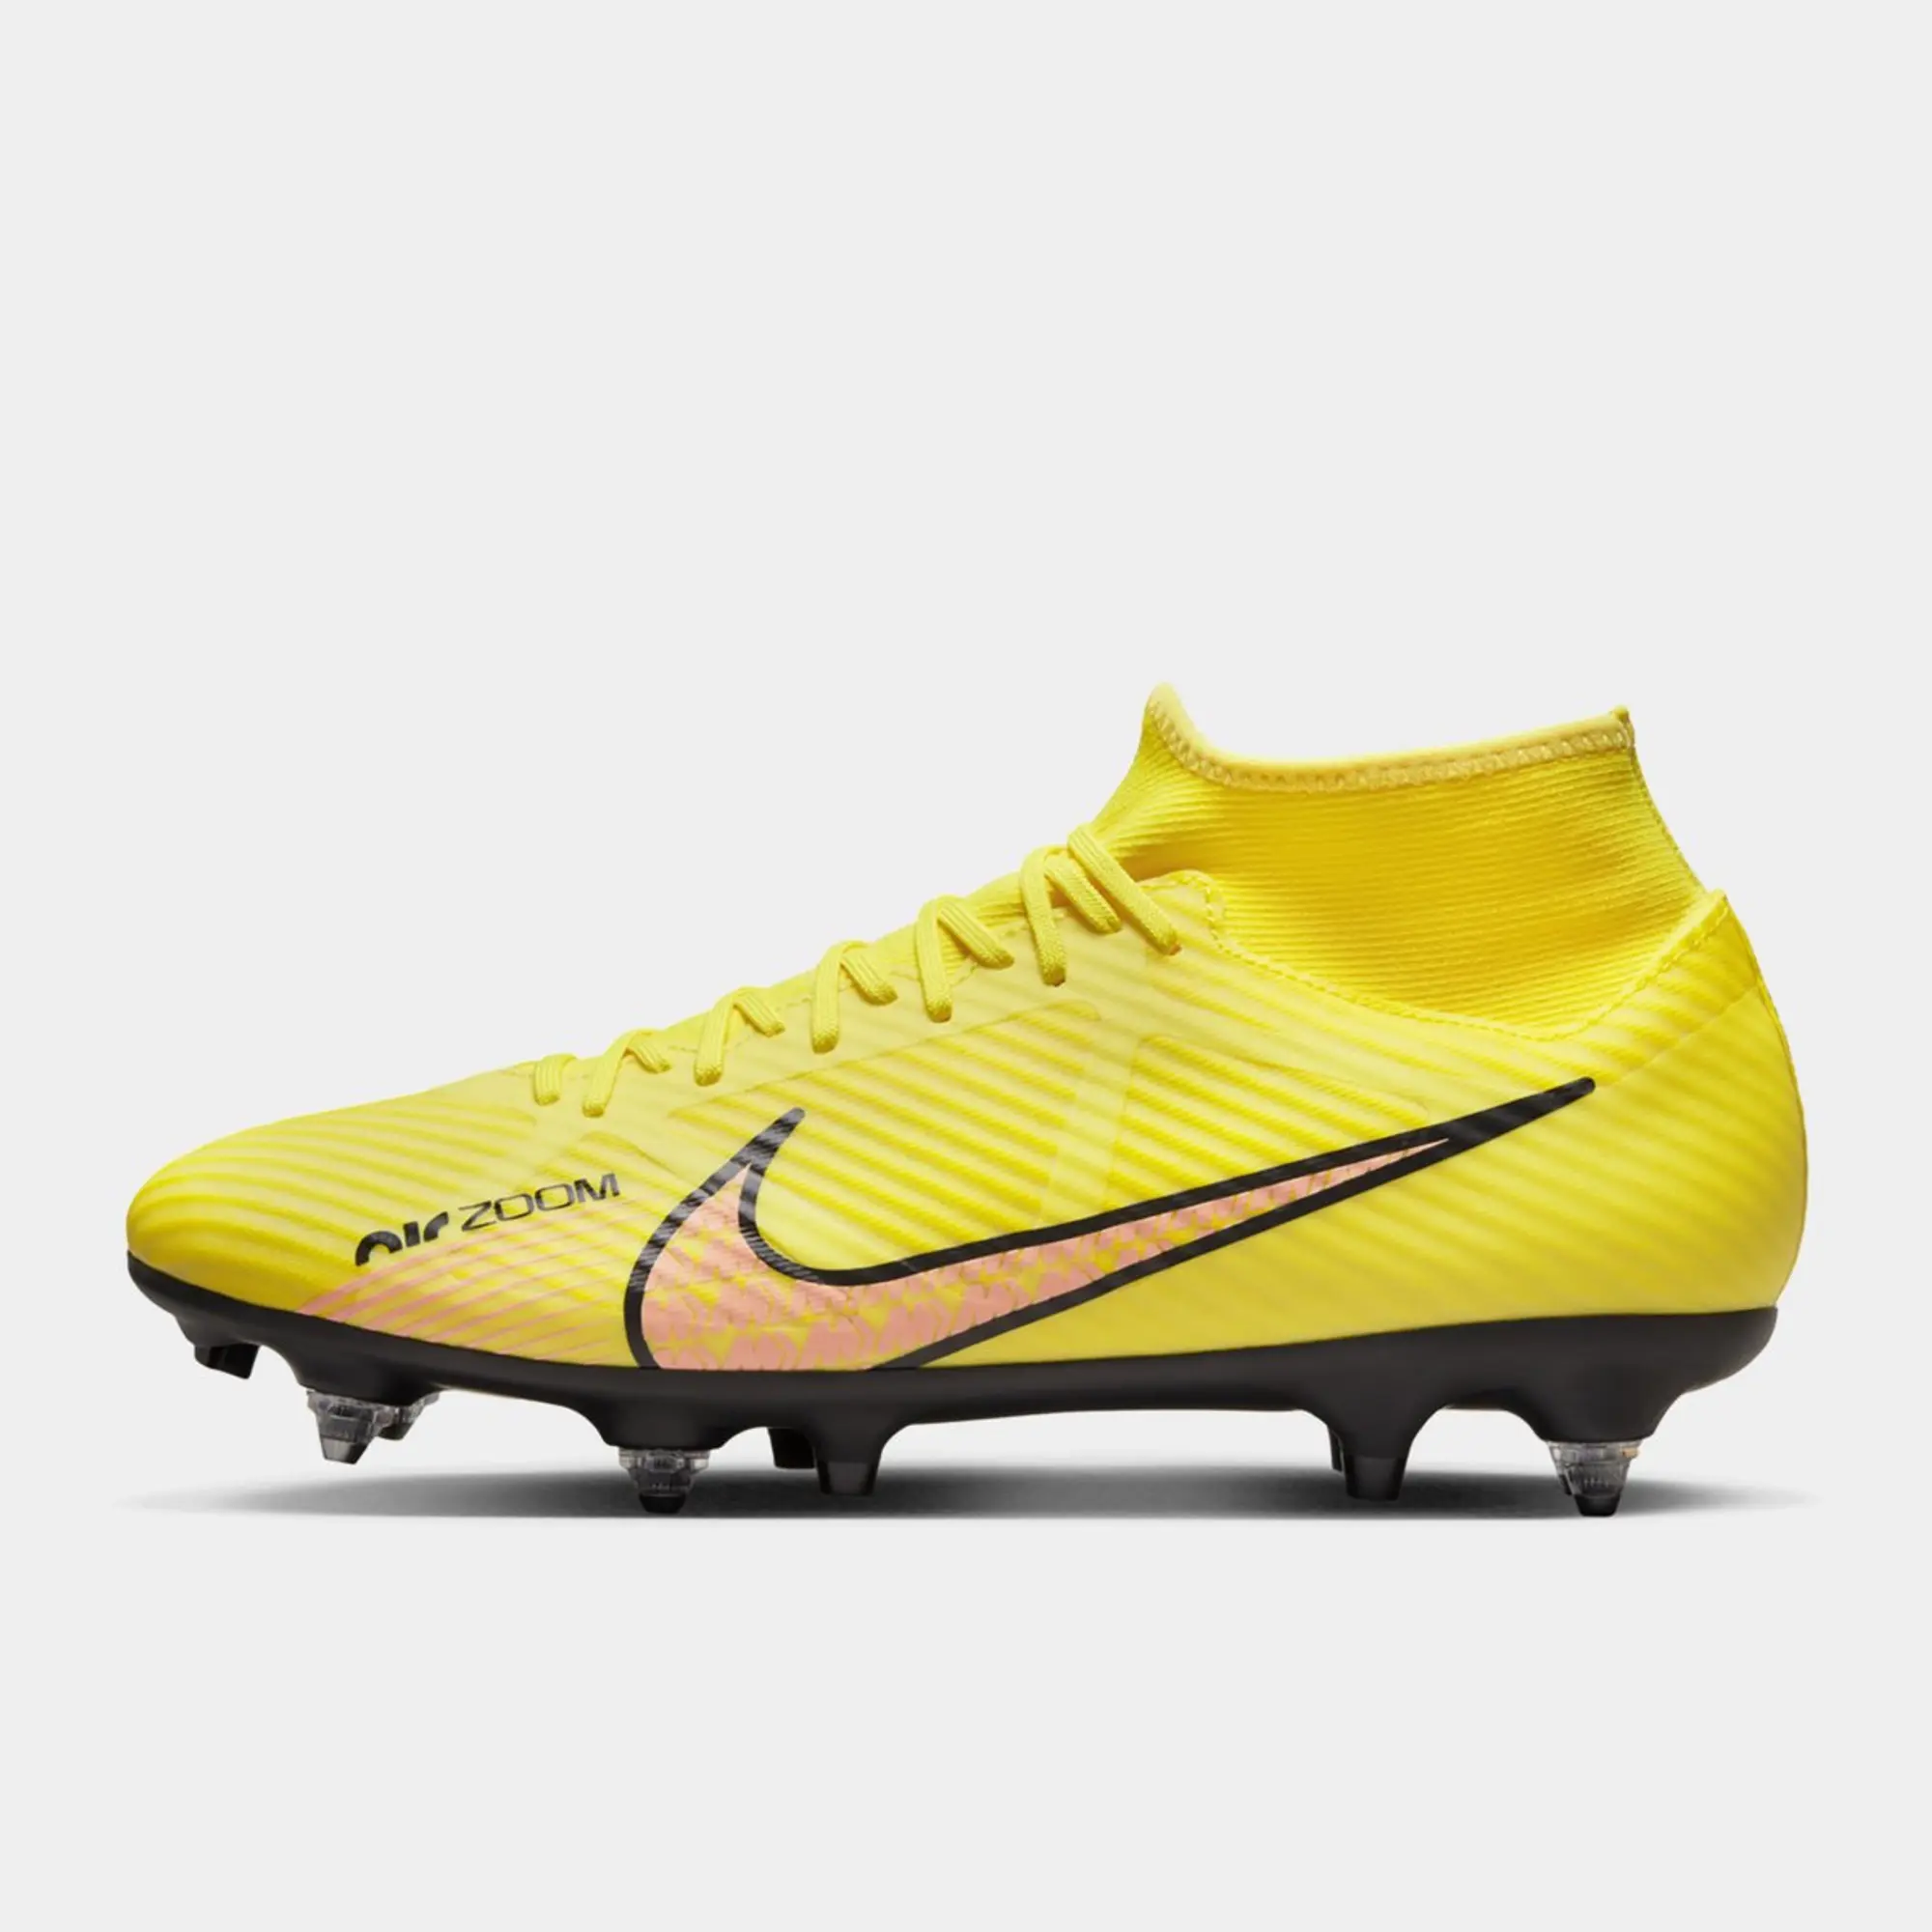 Nike Mercurial Superfly Academy DF SG Football Boots - Yellow